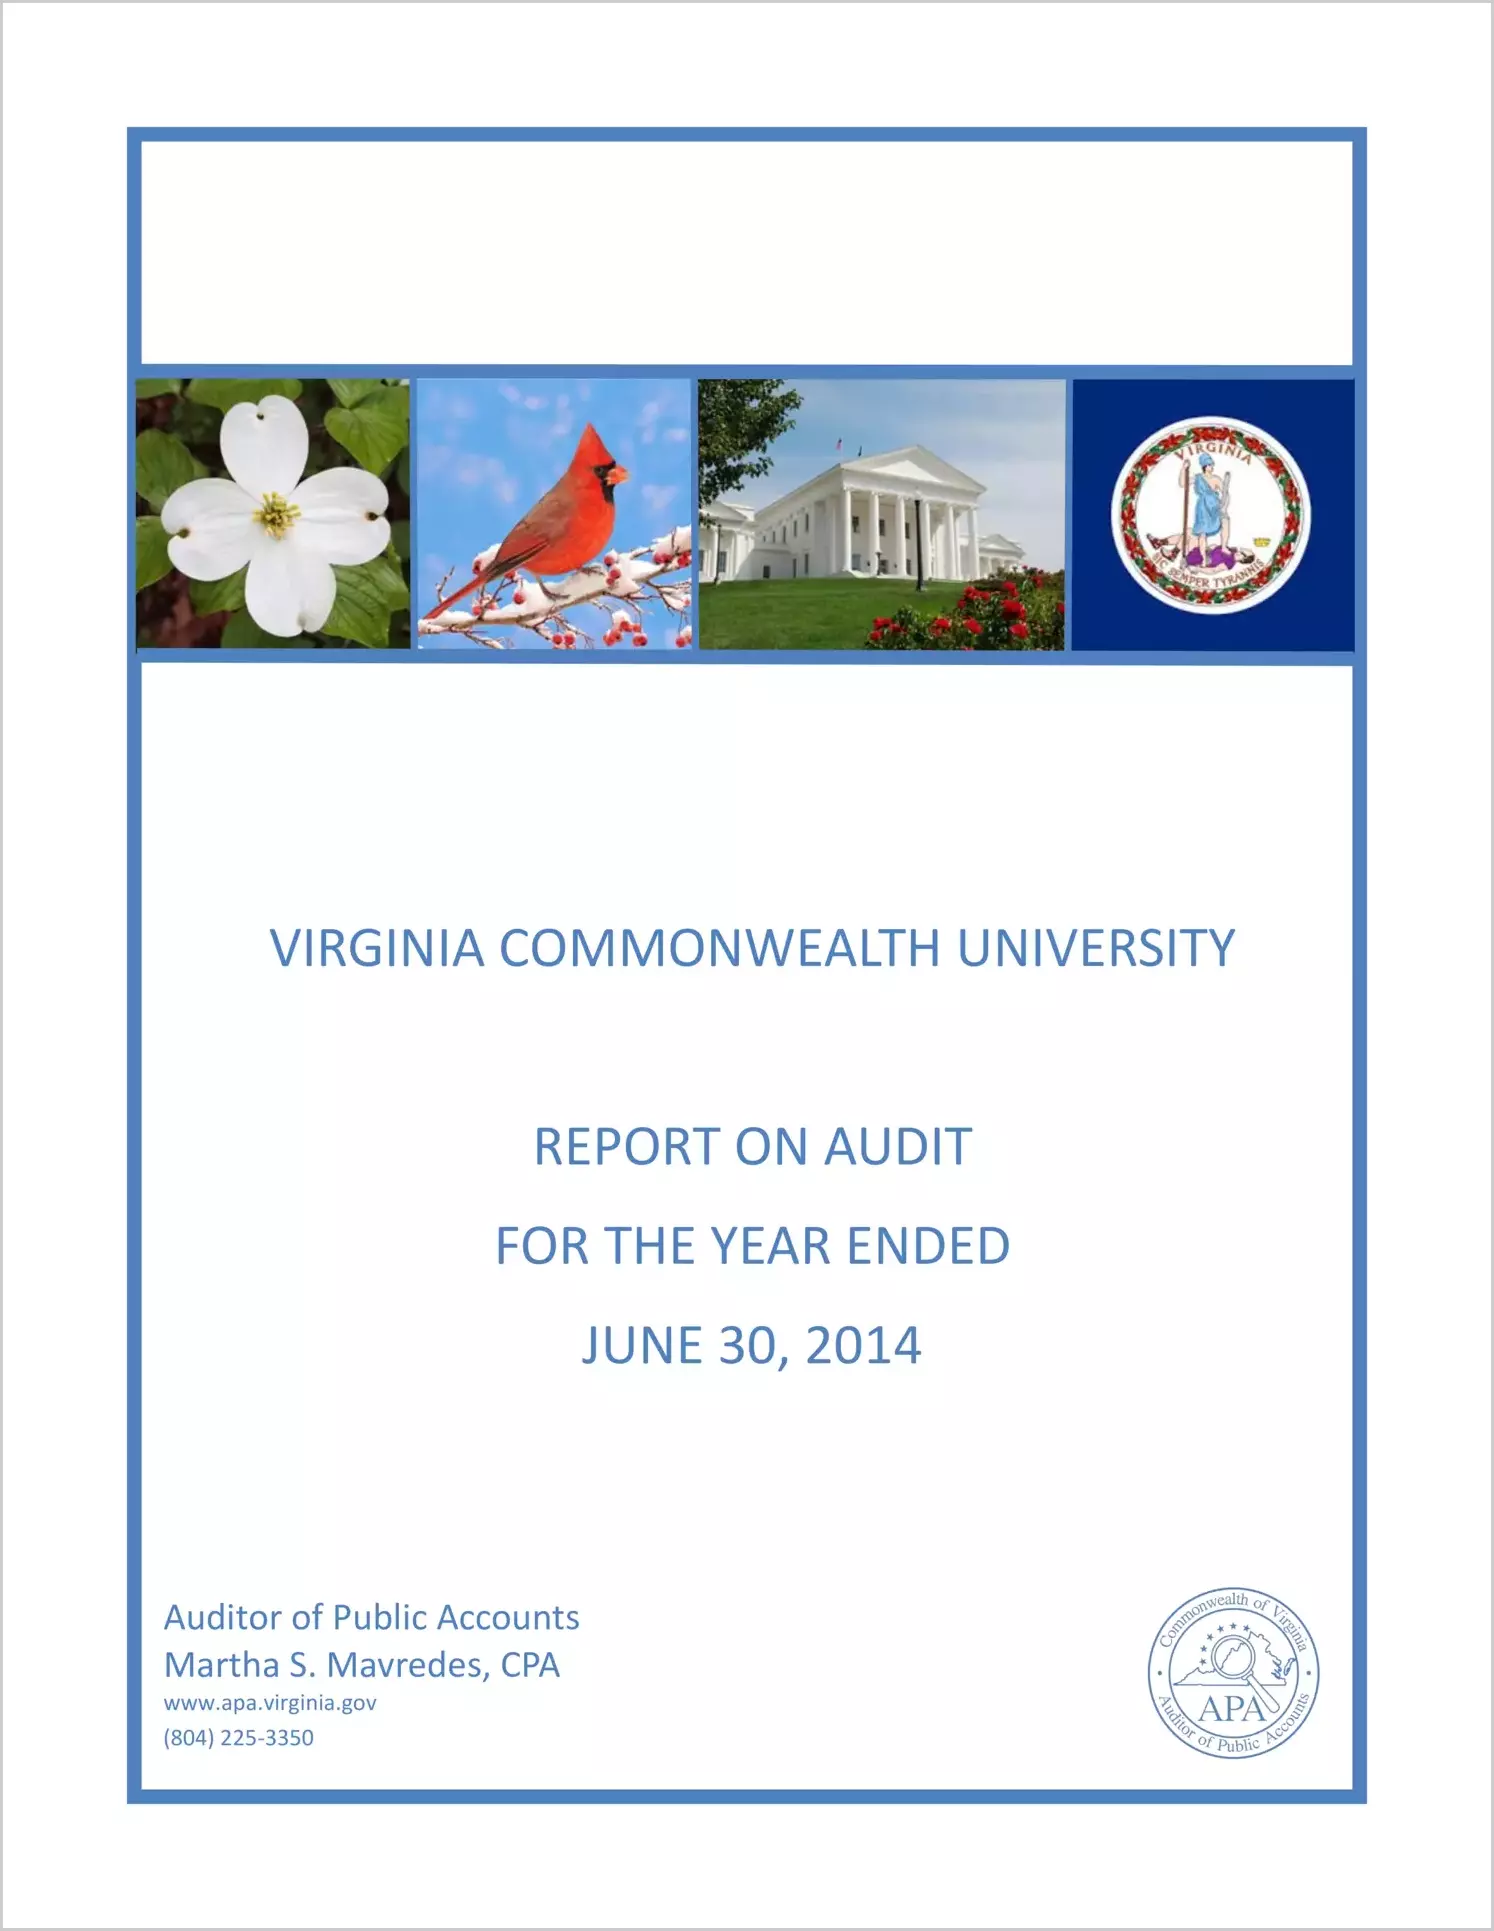 Virginia Commonwealth University for the year ended June 30, 2014